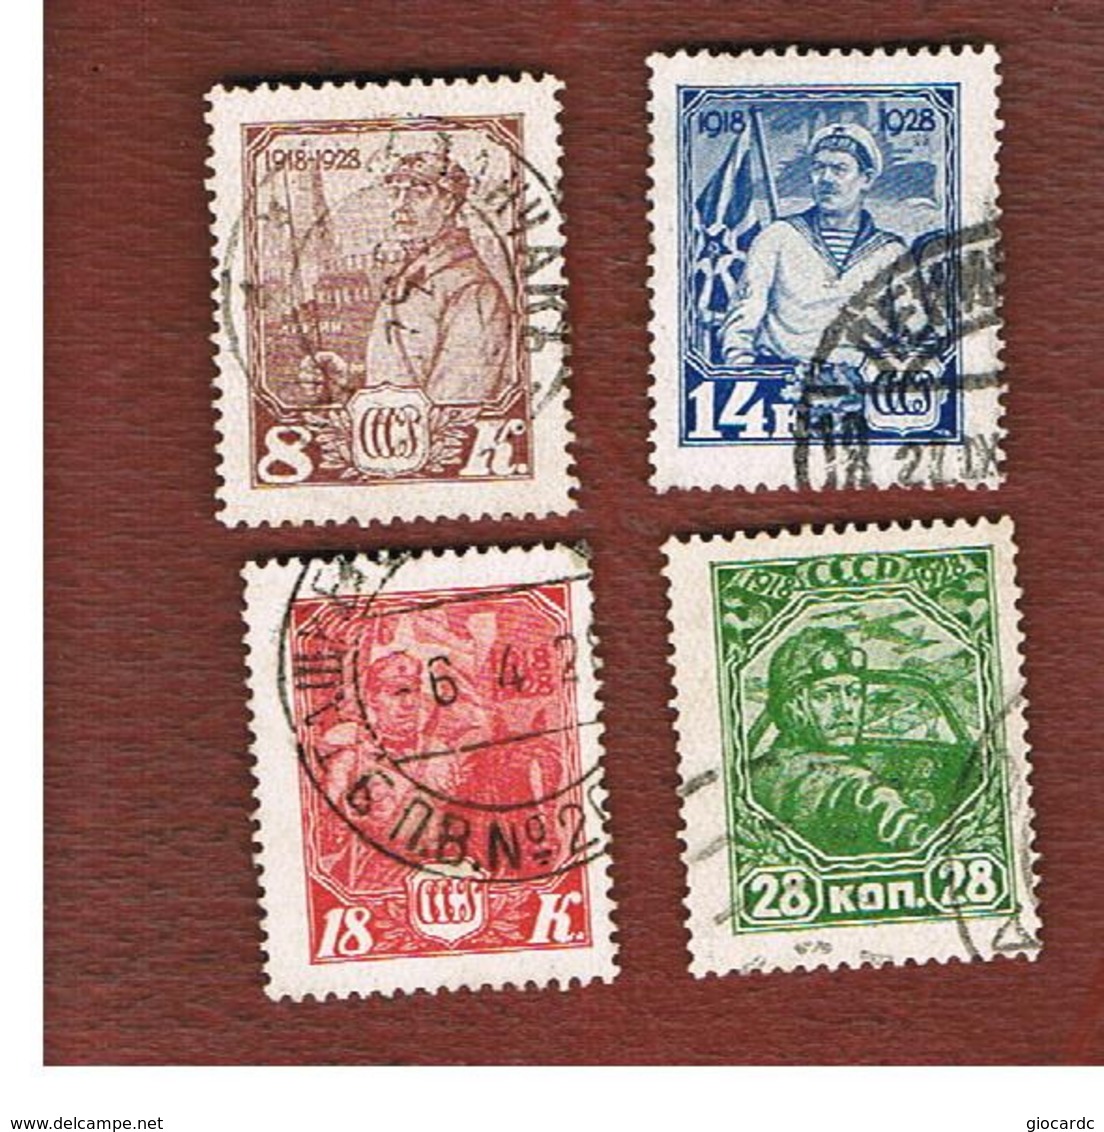 URSS -  SG 539.532   -  1928 RED ARMY ANNIVERSARY (COMPLET SET OF 4)  - USED °   RIF. CP - Gebraucht